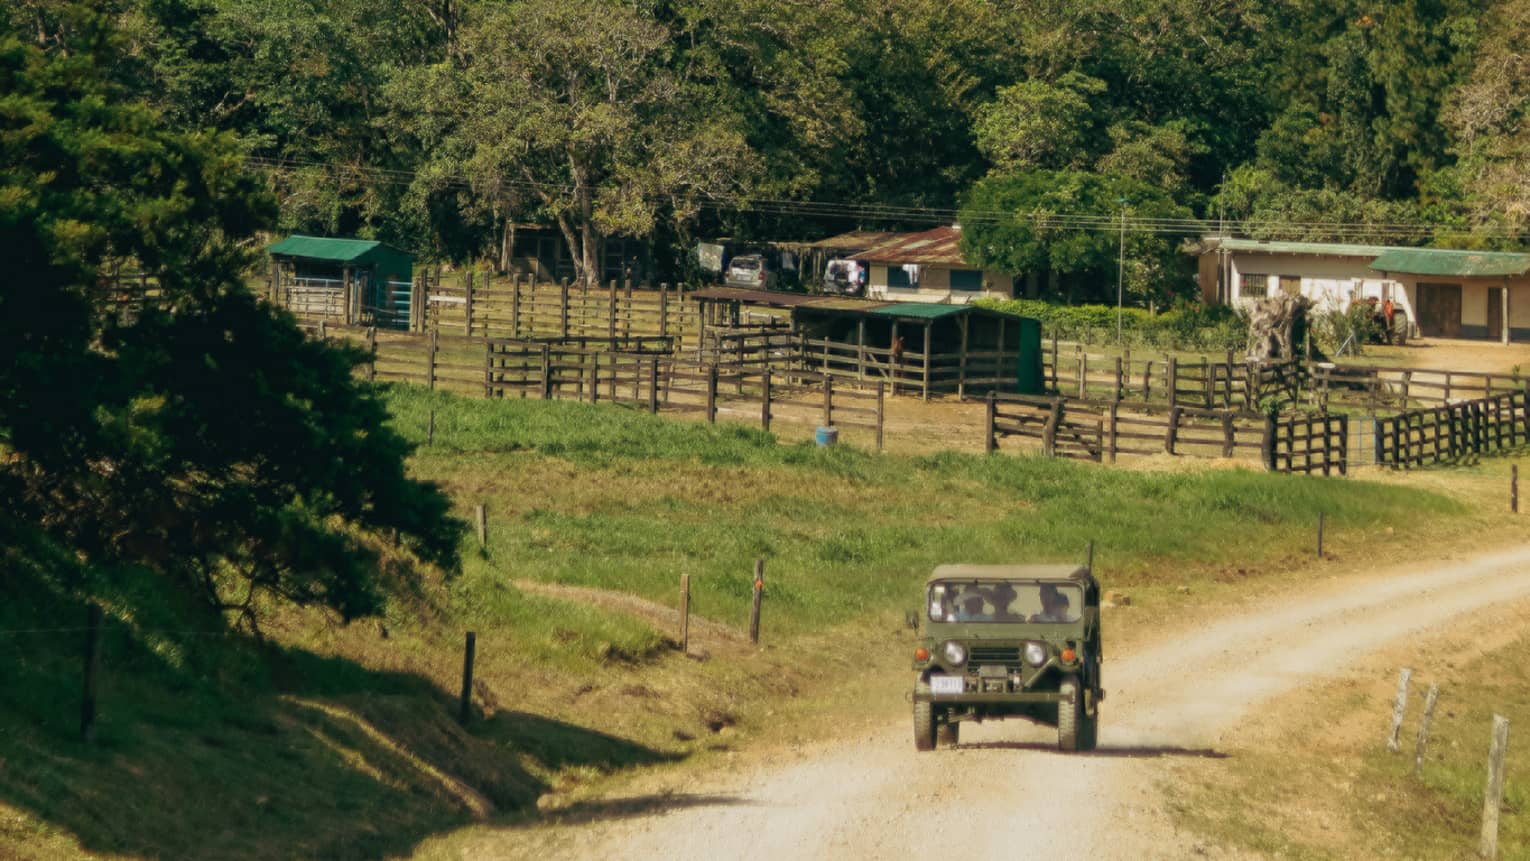 A vintage-style jeep rides along a dirt road, passing by a small farm in the hilly Costa Rican countryside